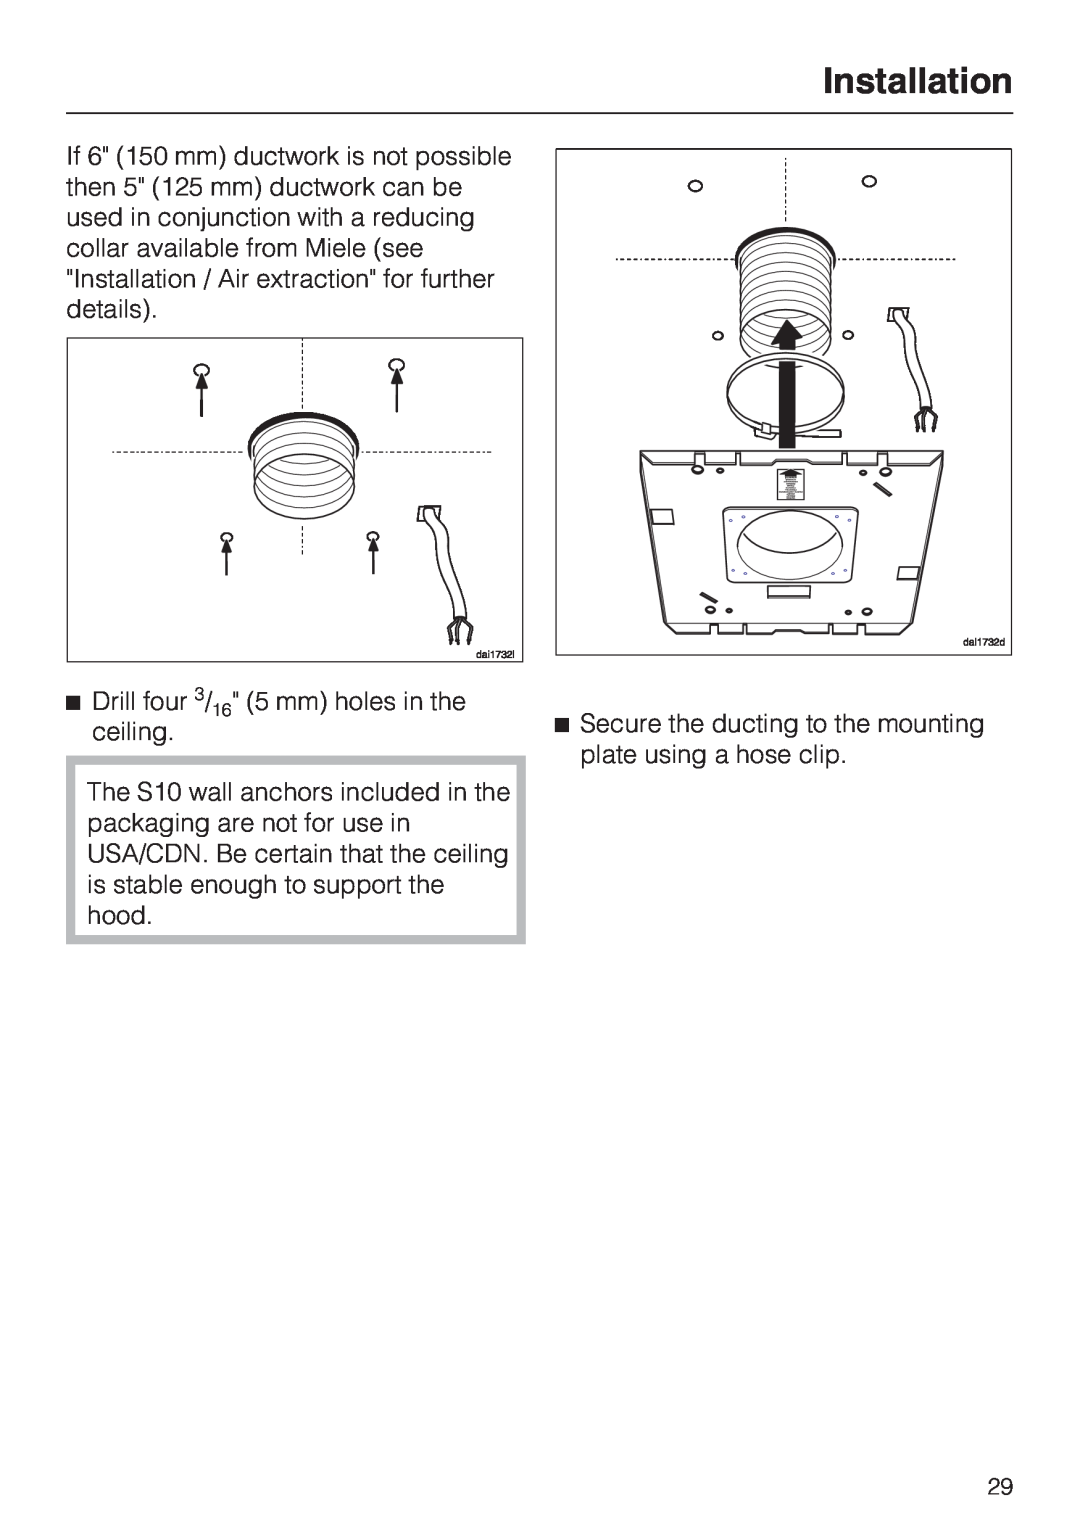 Miele DA 220-4 installation instructions Installation, Drill four 3/16 5 mm holes in the ceiling 